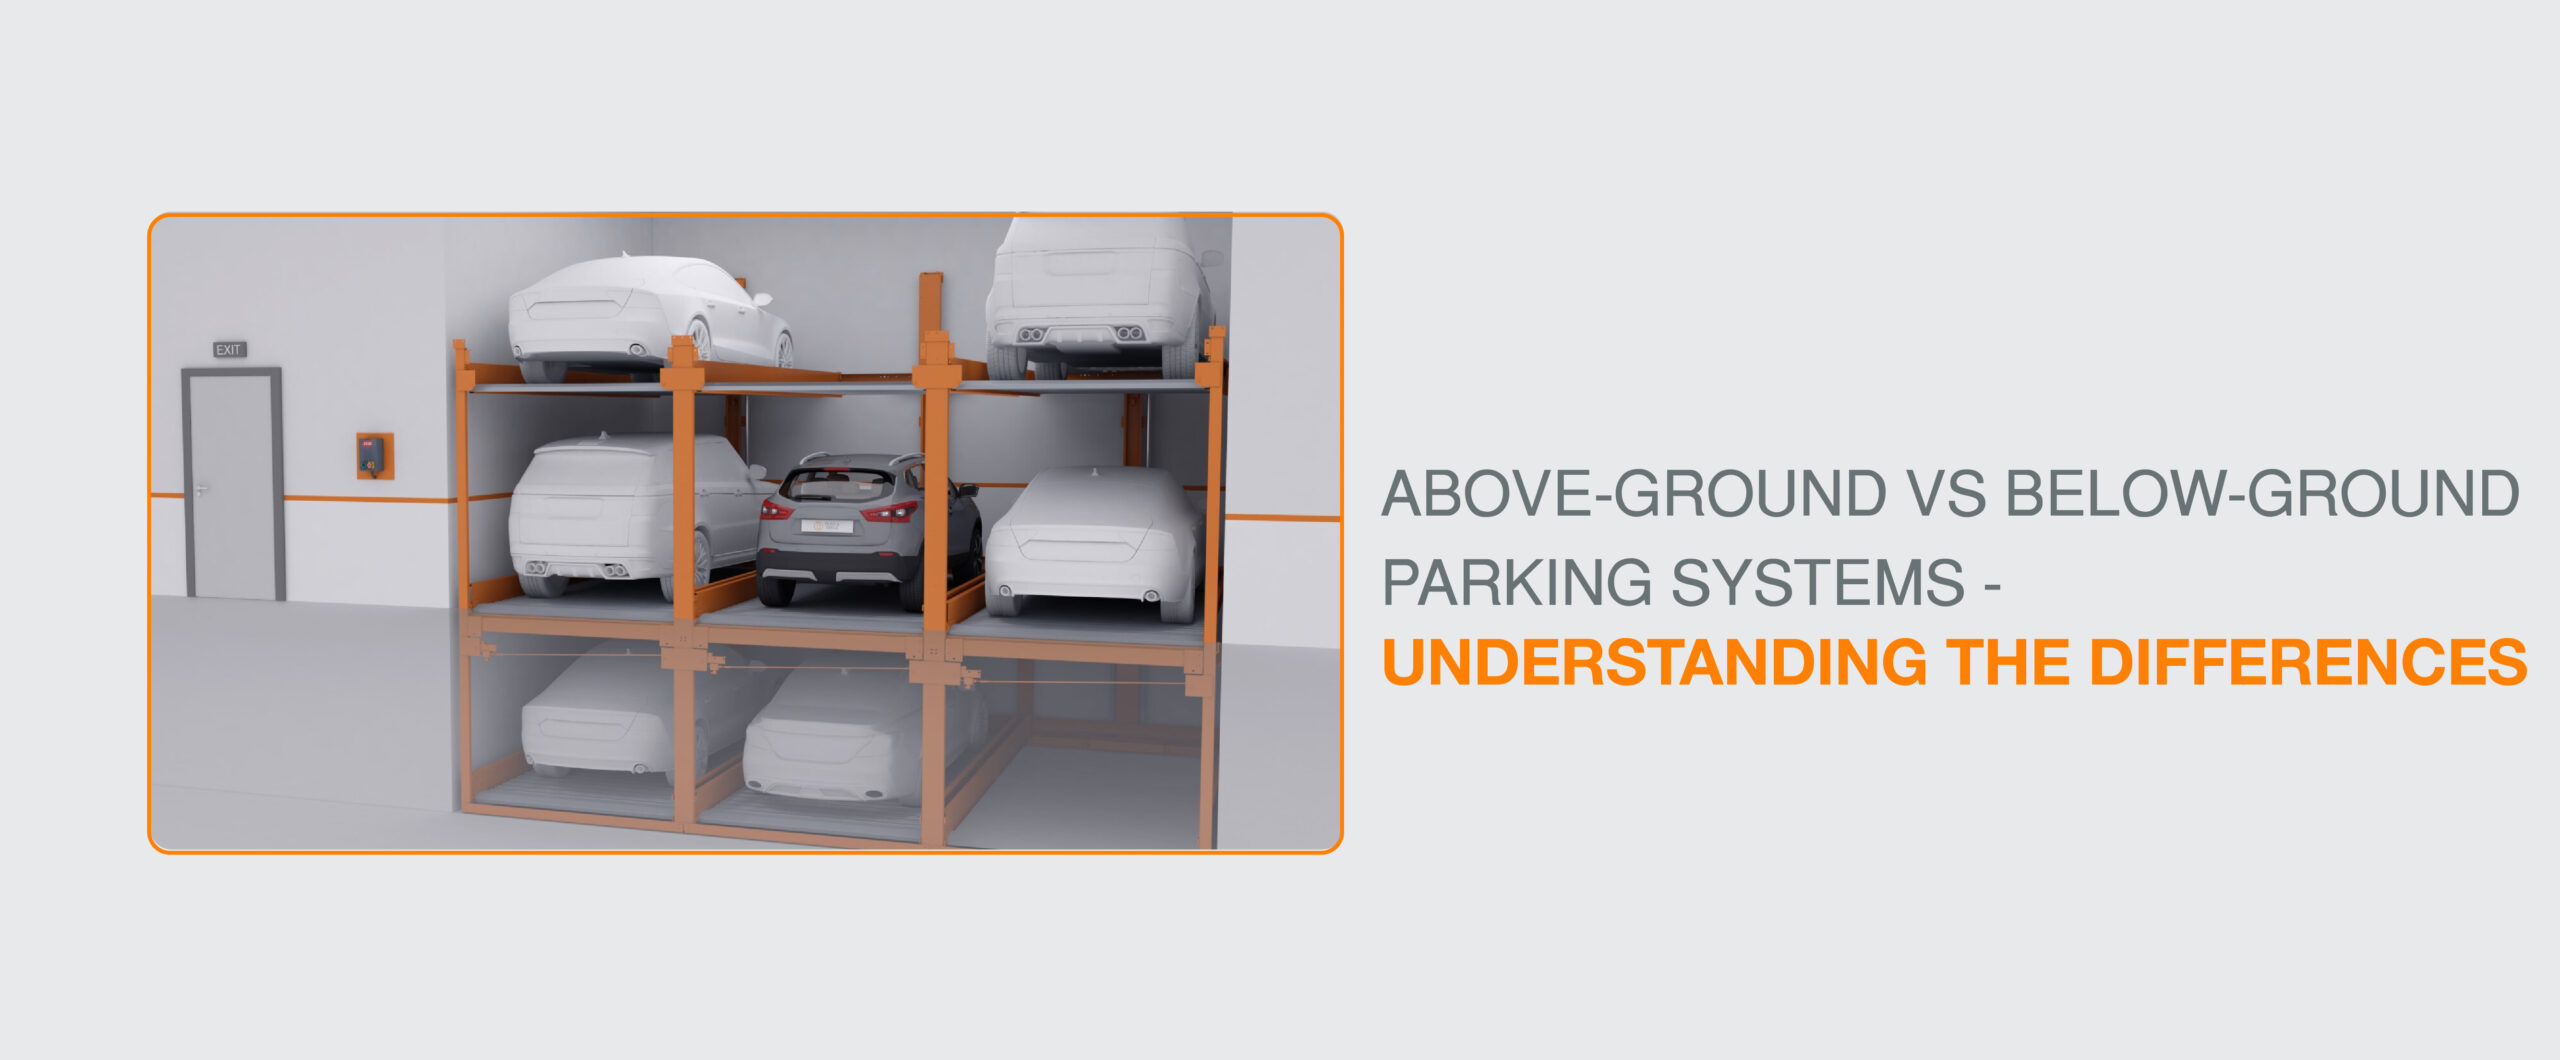 Above-Ground vs Below-Ground Parking Systems Understanding the Differences